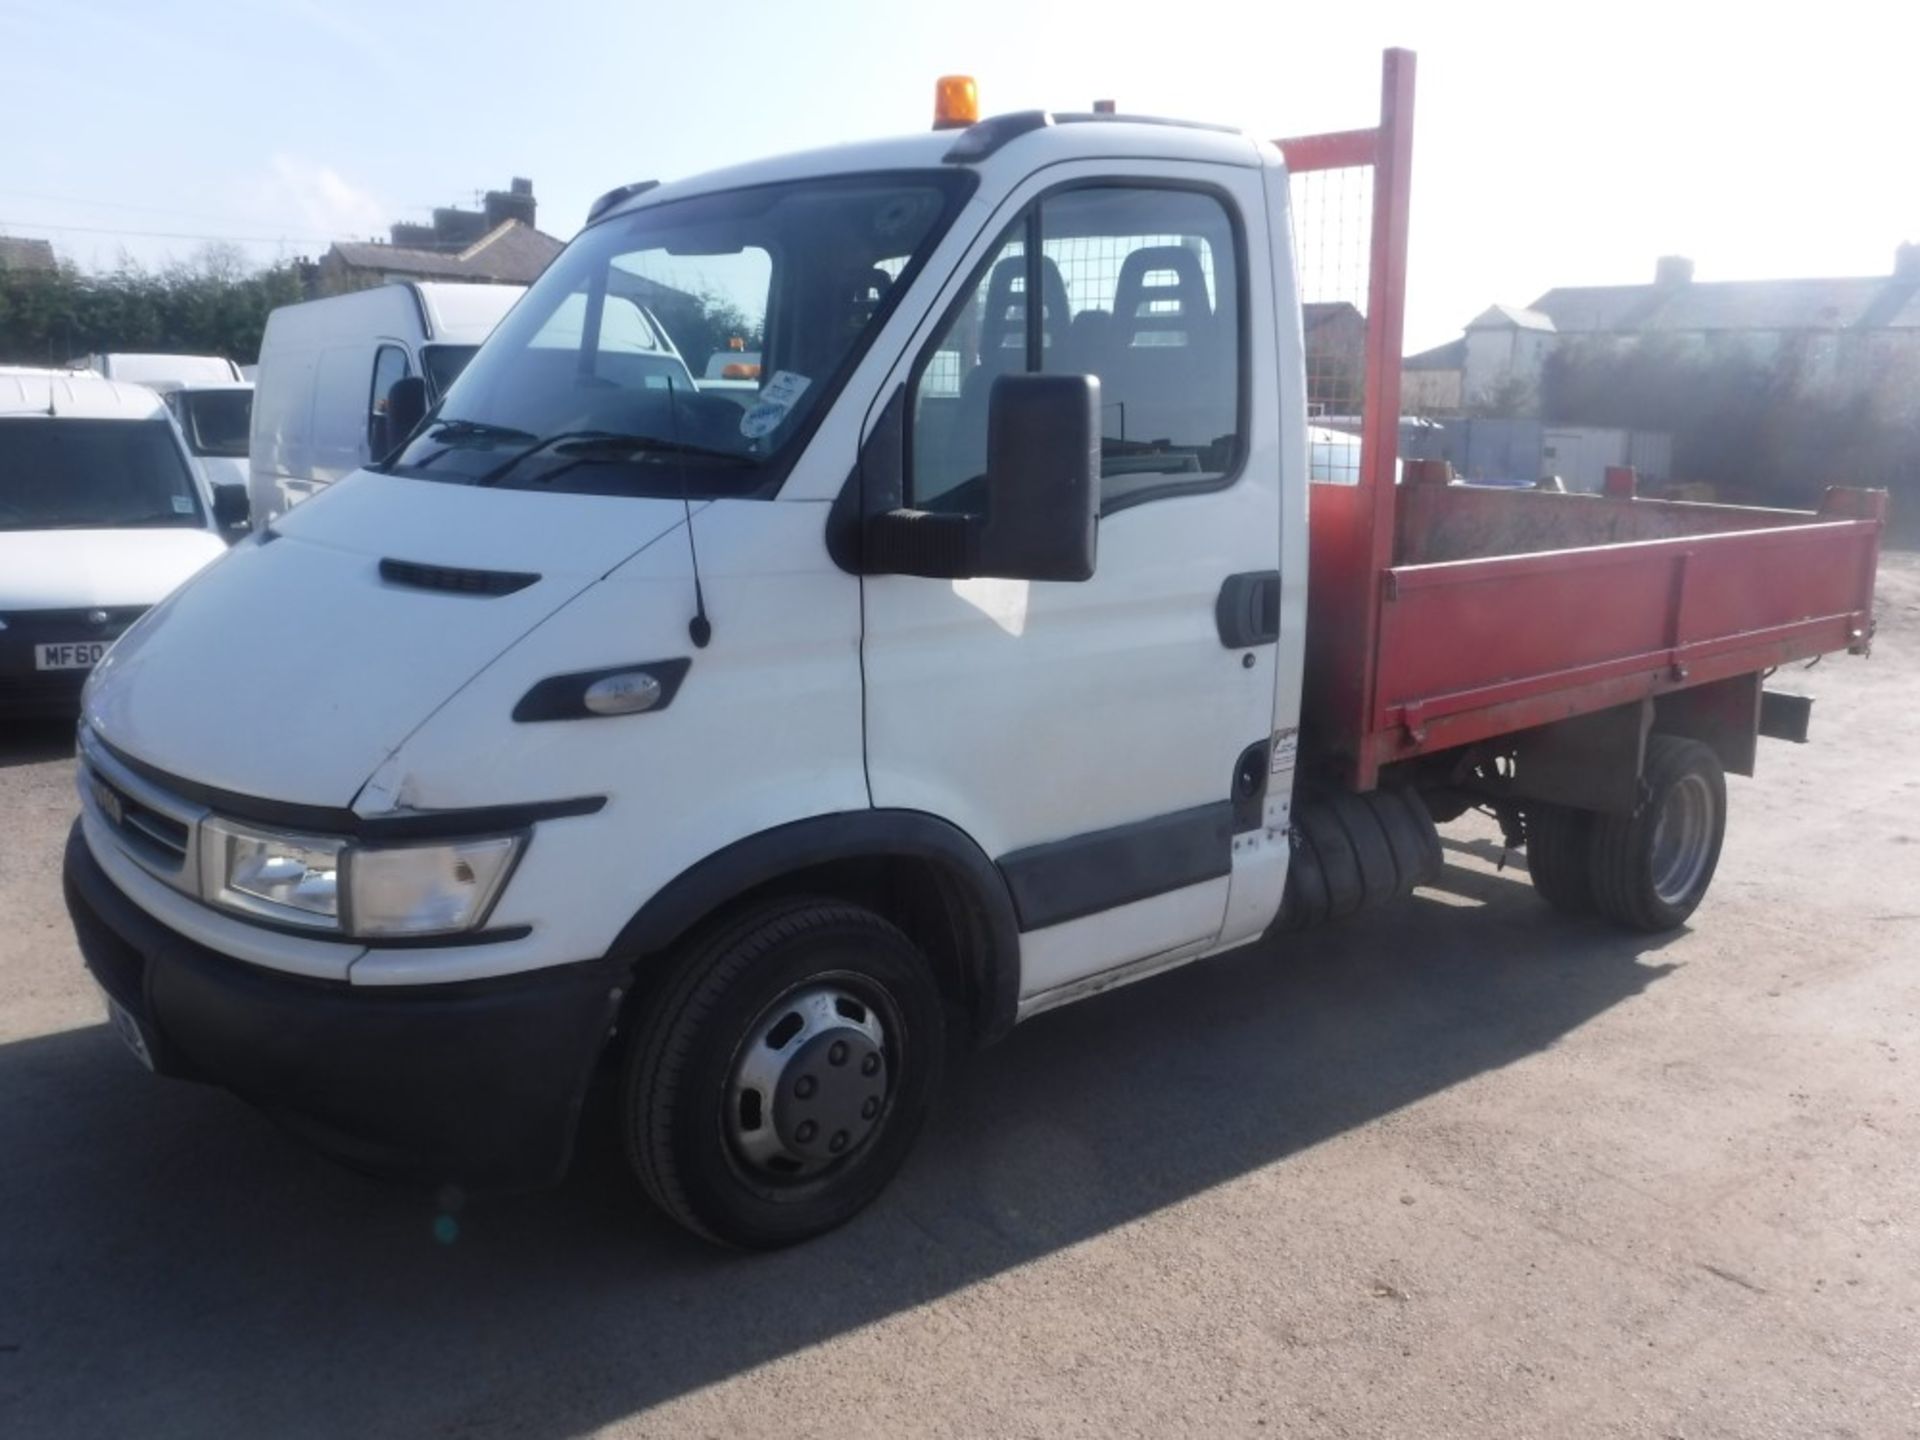 55 reg IVECO DAILY 35C12 MWB TIPPER, 1ST REG 09/05, TEST 04/16, 66662M WARRANTED, V5 HERE, 1 - Image 2 of 5